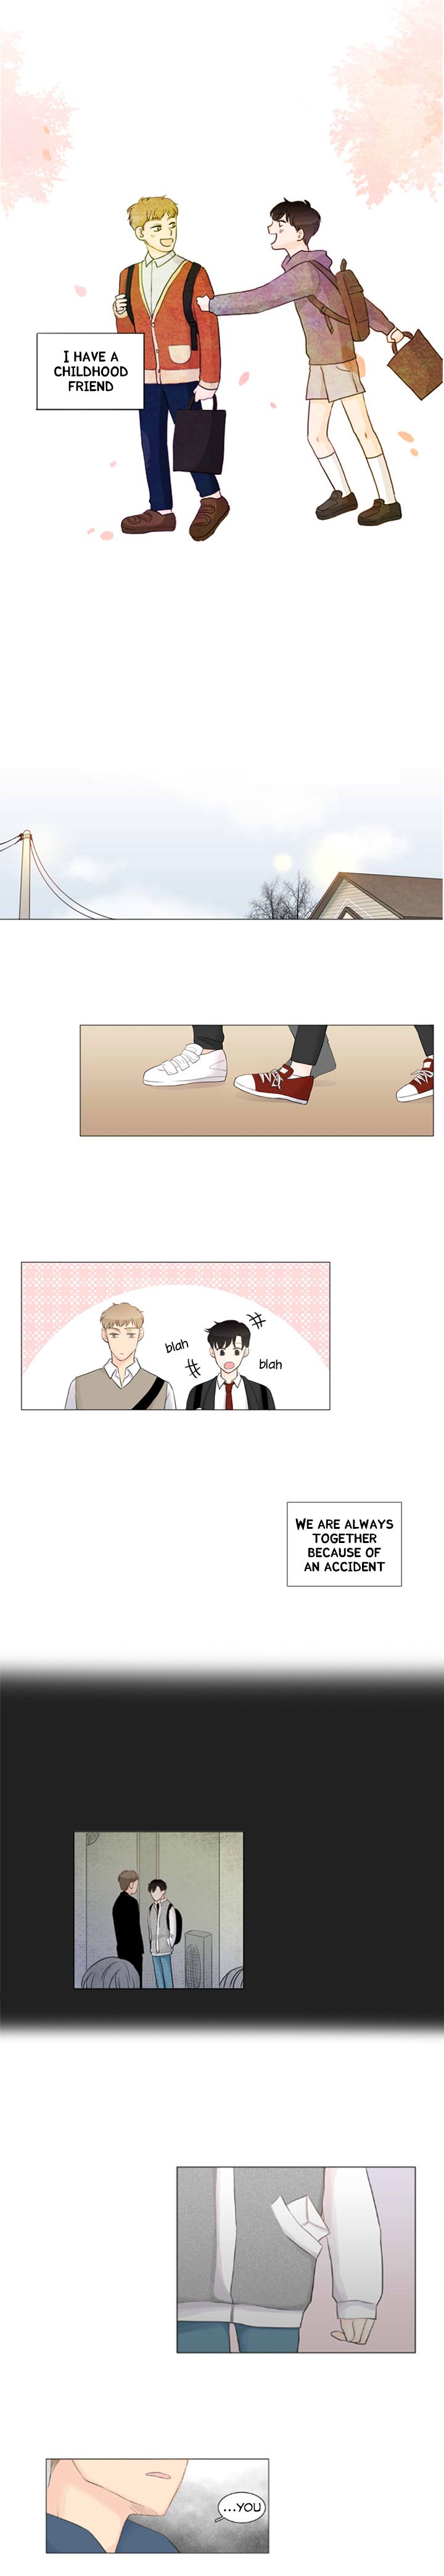 Between Us Vol. 1 Ch. 0 Preview